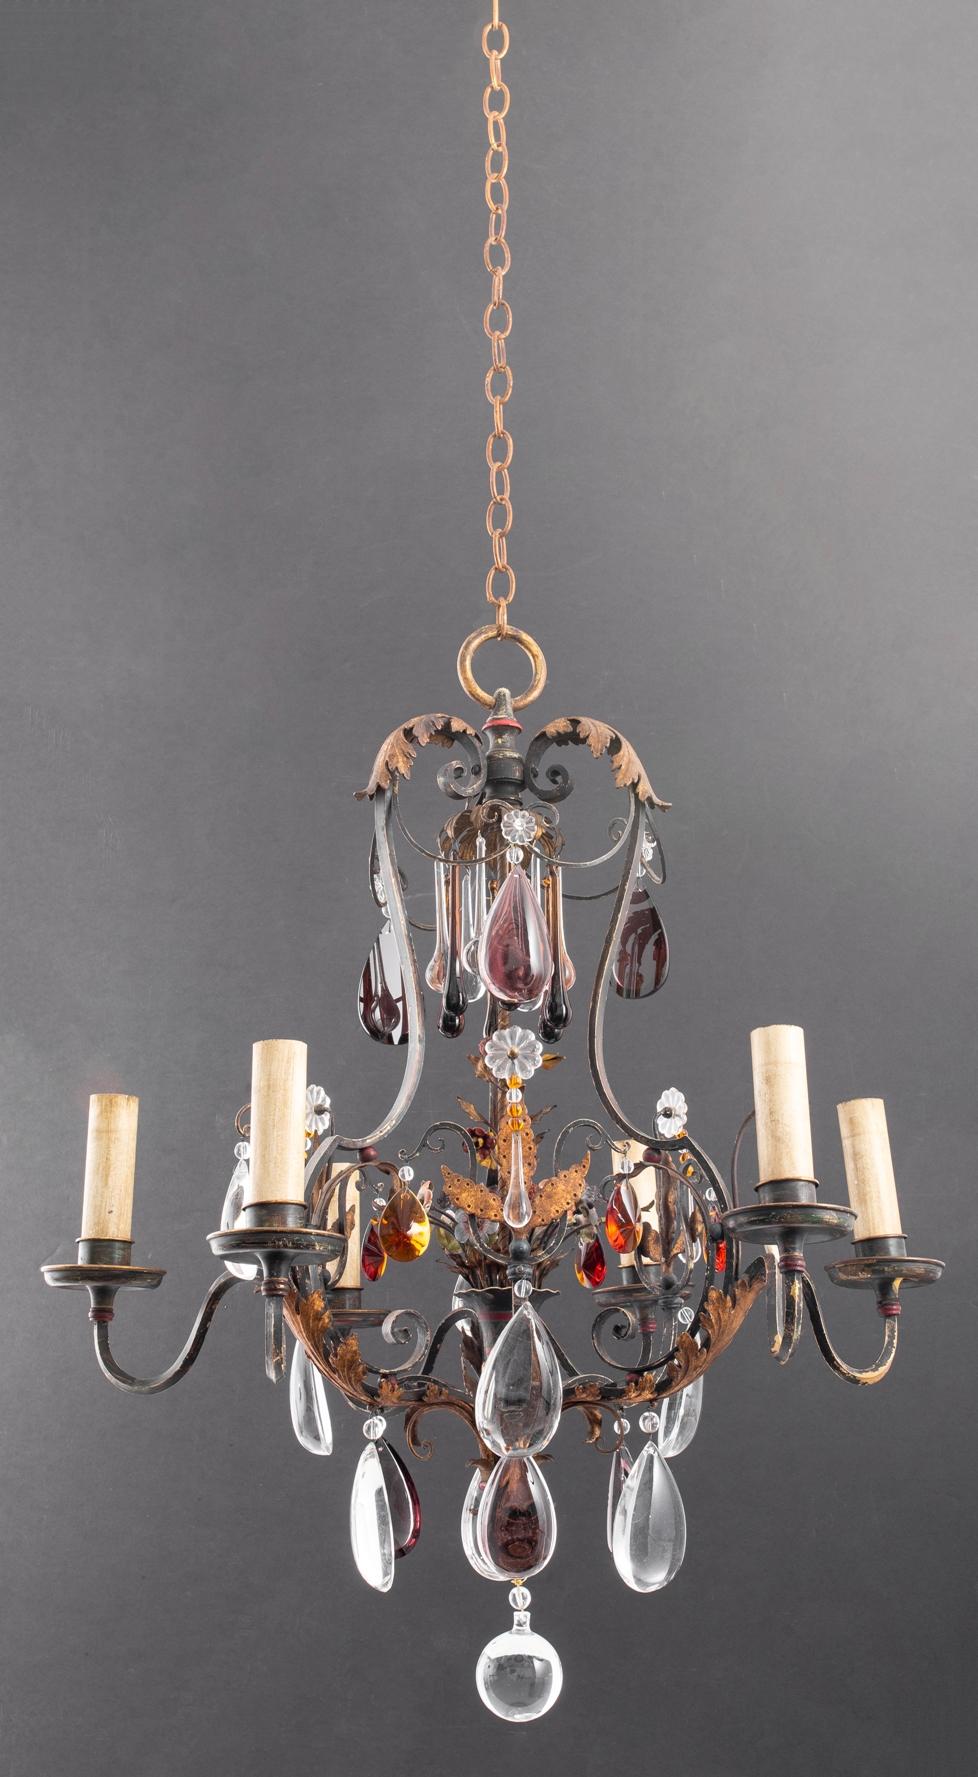 1920s antique Italian cast brass/iron chandelier with colored and clear pear shaped rock crystals with enamel flowers in the center of the iron frame. Chandelier has 6 arms. Recently rewired and restored. 

Dealer: R316TF.